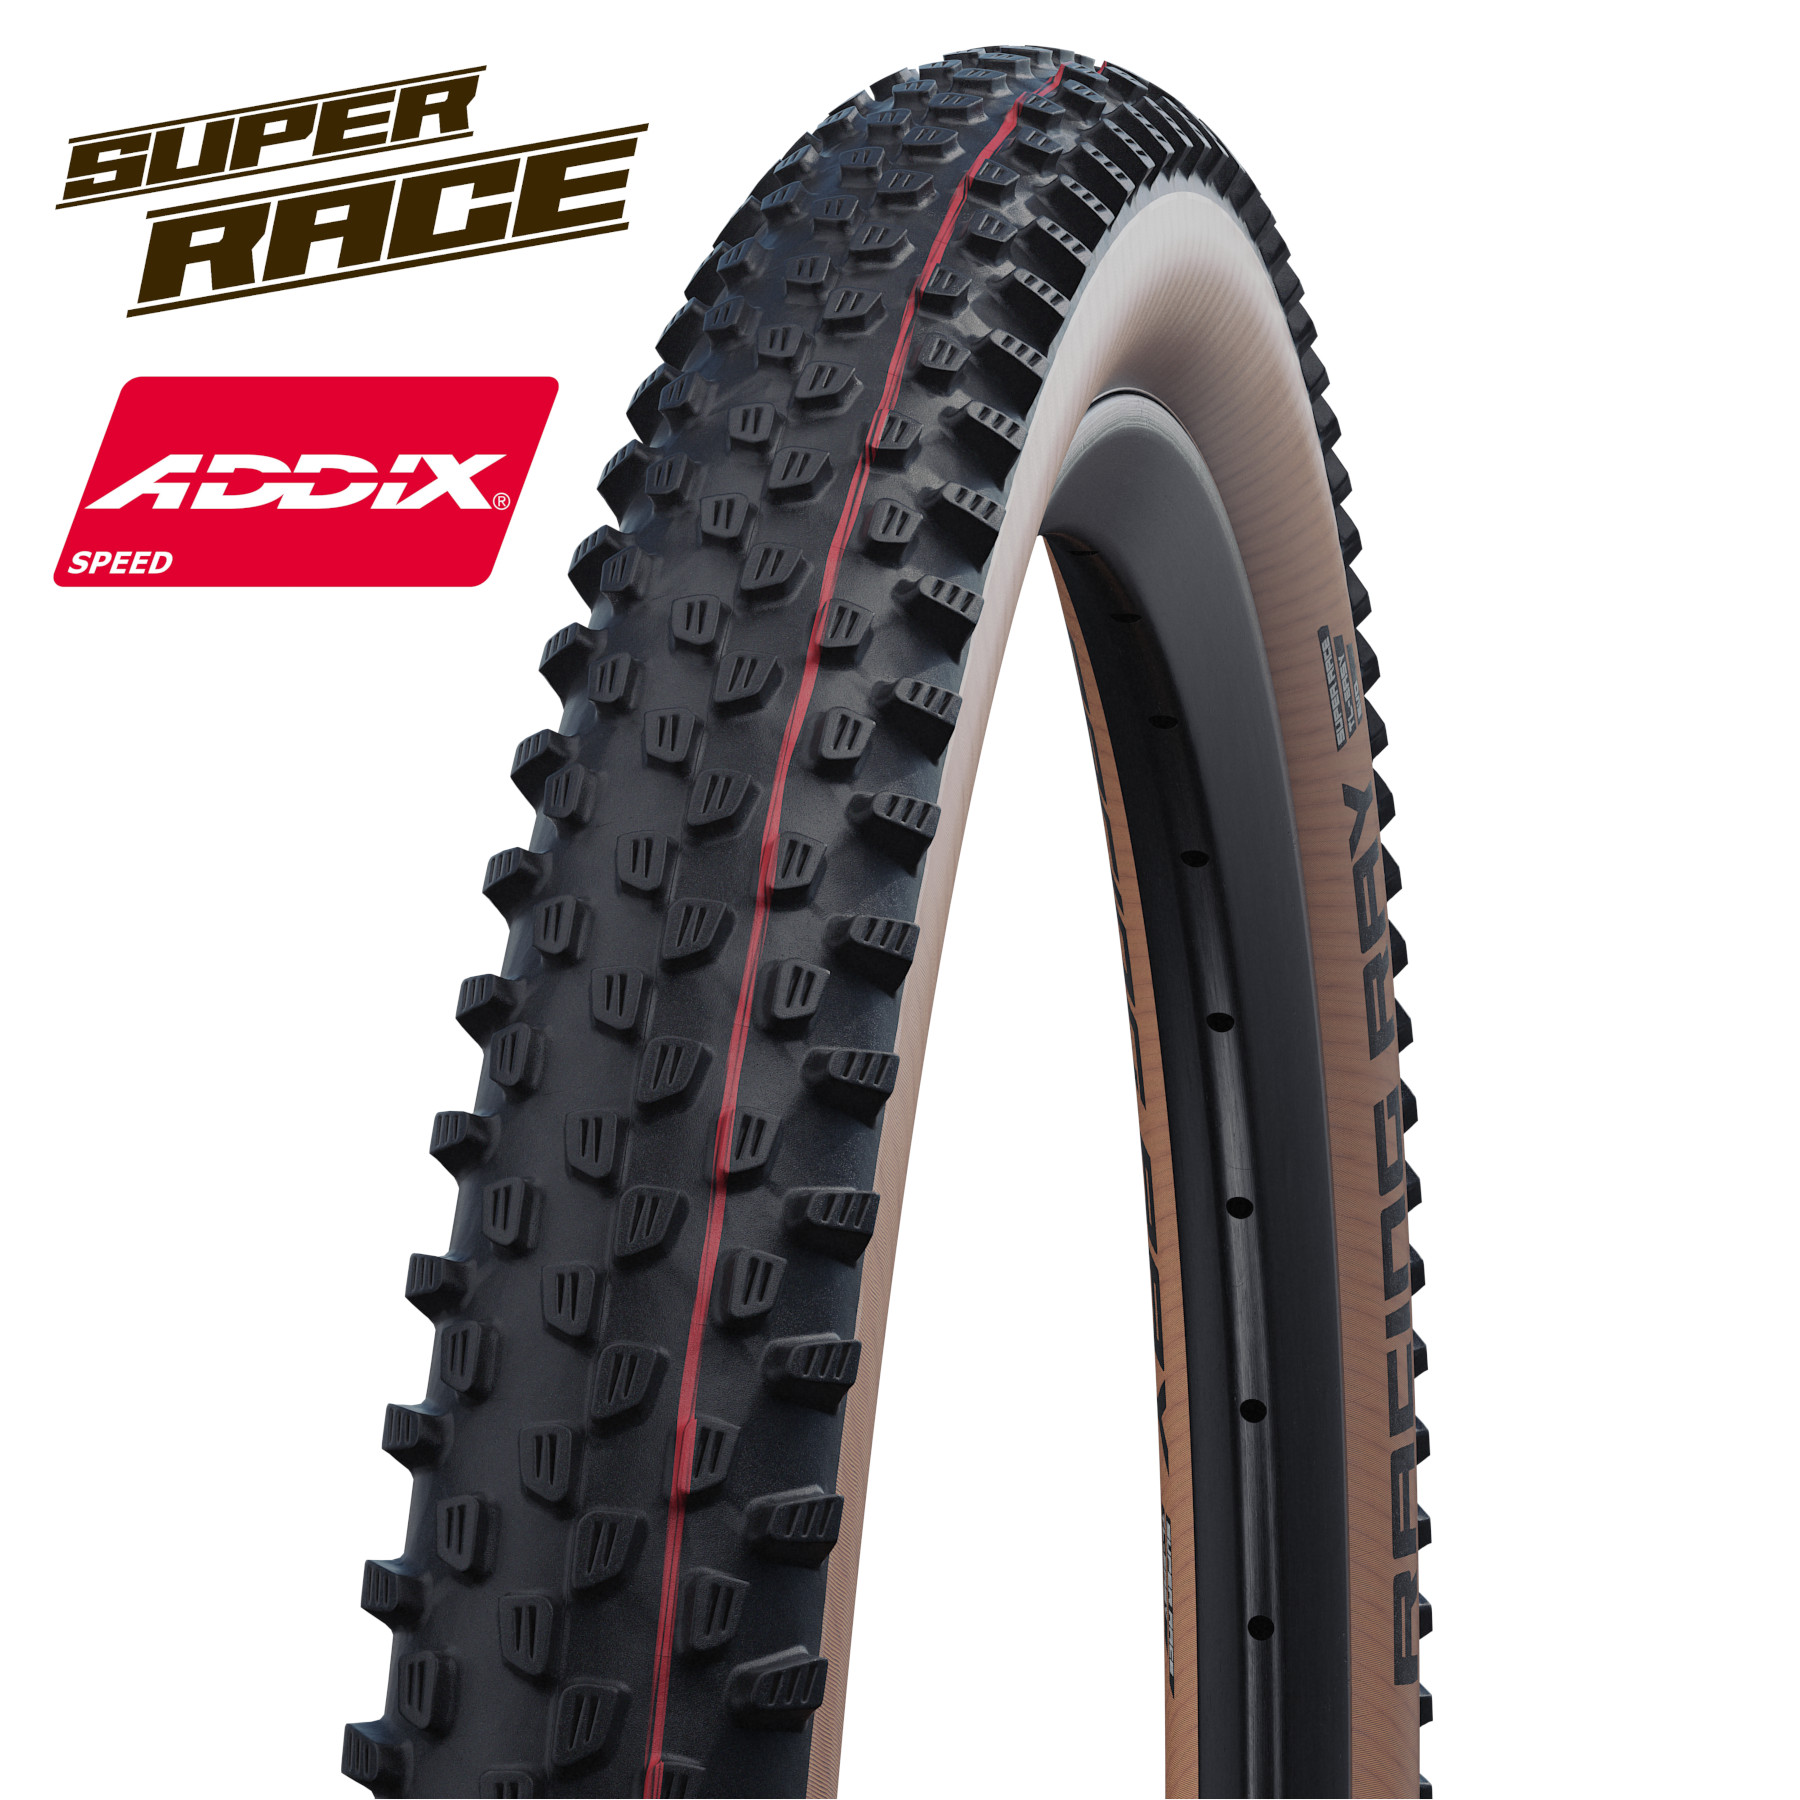 Image of Schwalbe Racing Ray Evolution MTB Folding Tire - AddixSpeed - SuperRace - TLEasy - 29x2.25 Inches - Transparent-Skin